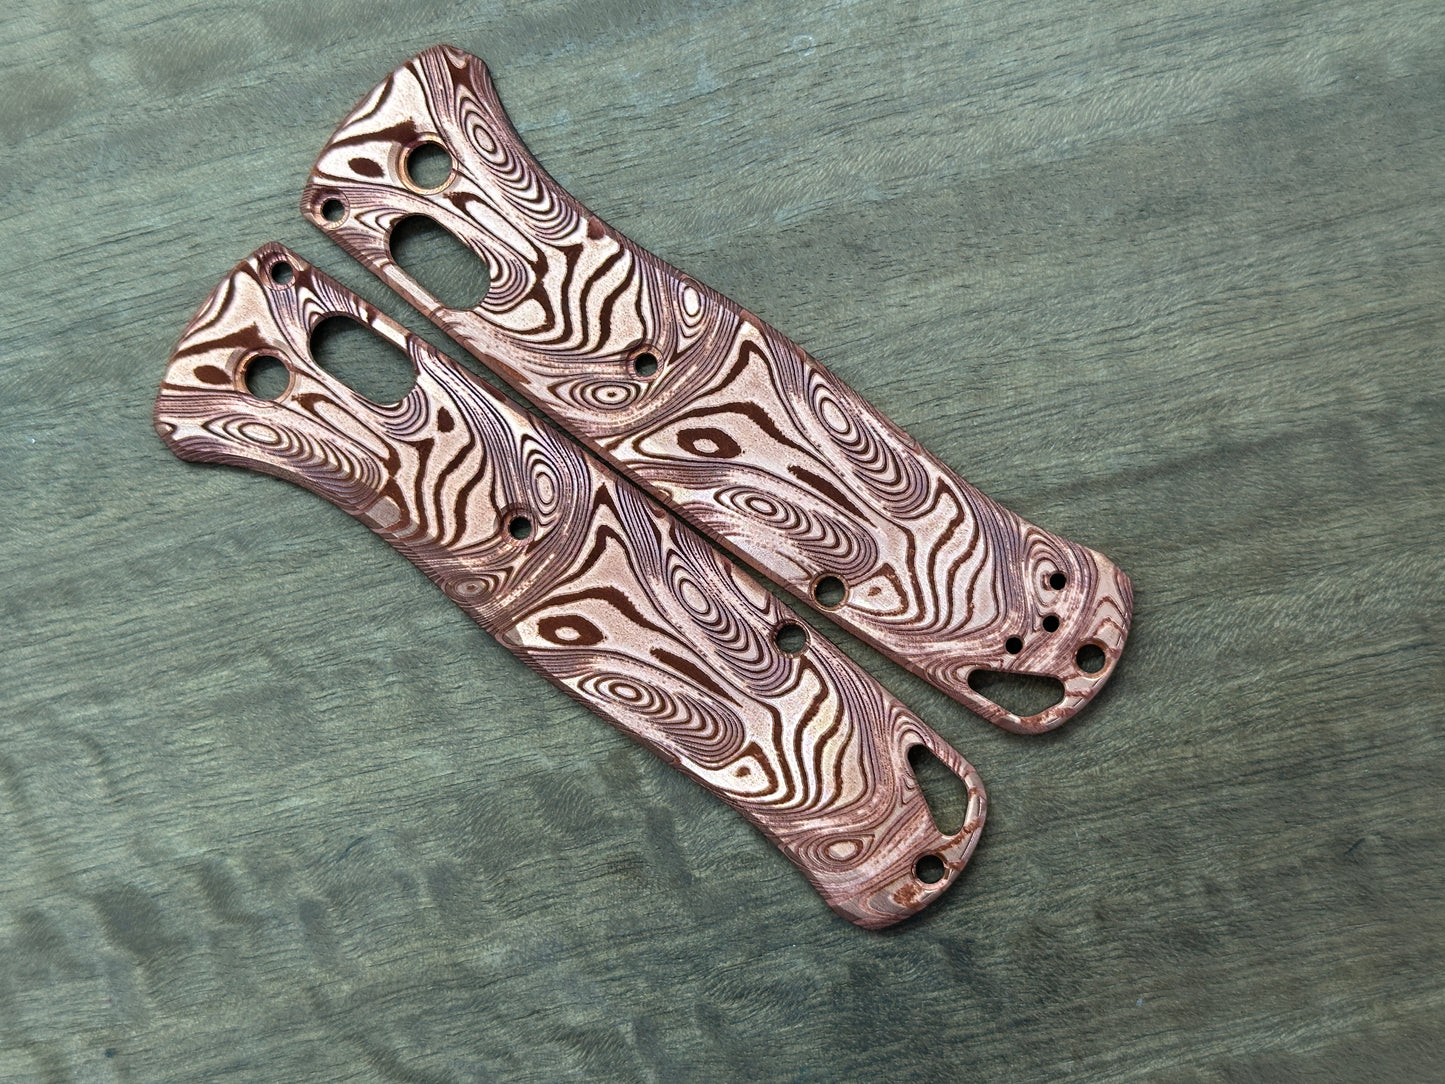 Dama FISH pattern engraved Copper Scales for Benchmade Bugout 535